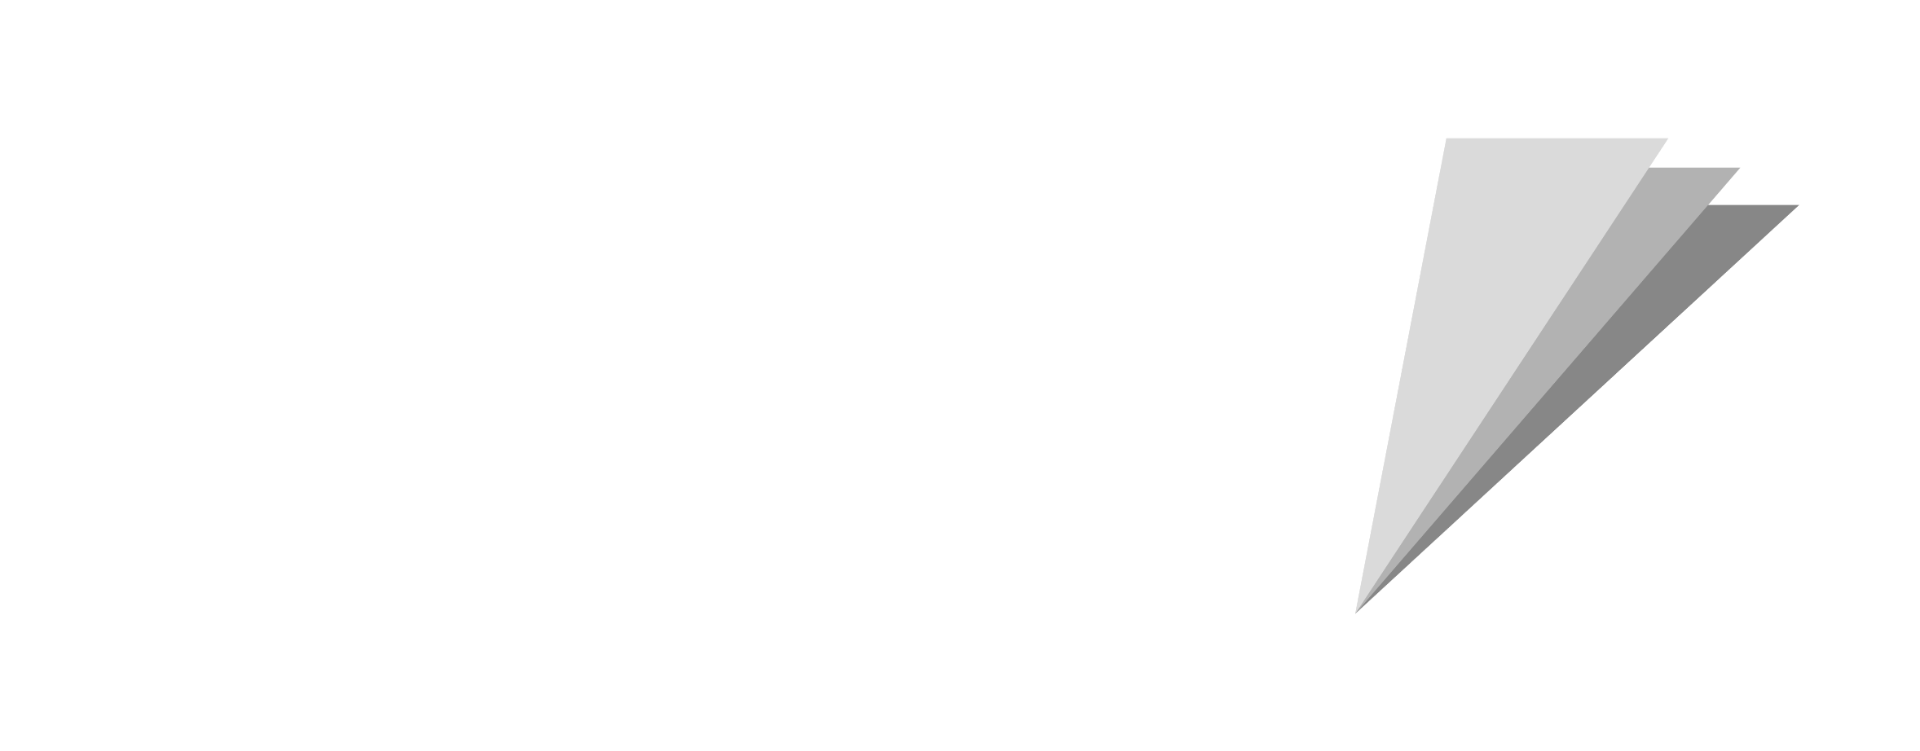 PPI (Simples) (P&B)